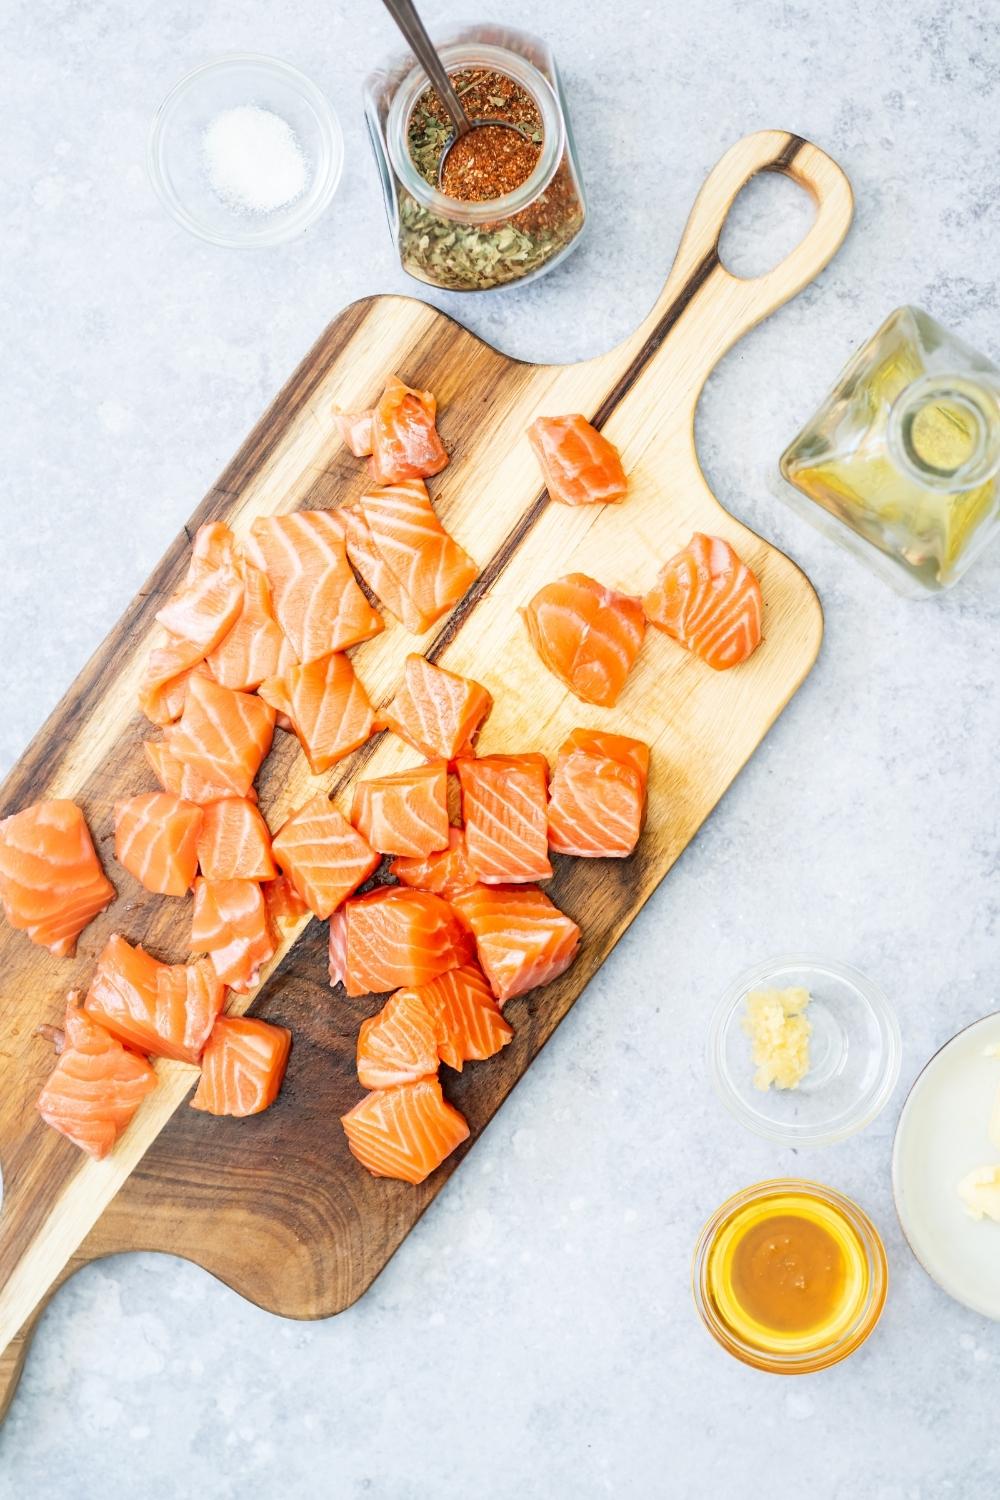 Salmon fillet pieces on a wooden cutting board on a grey counter. Behind the cutting board is a glass jar filled with blackened seasonings.